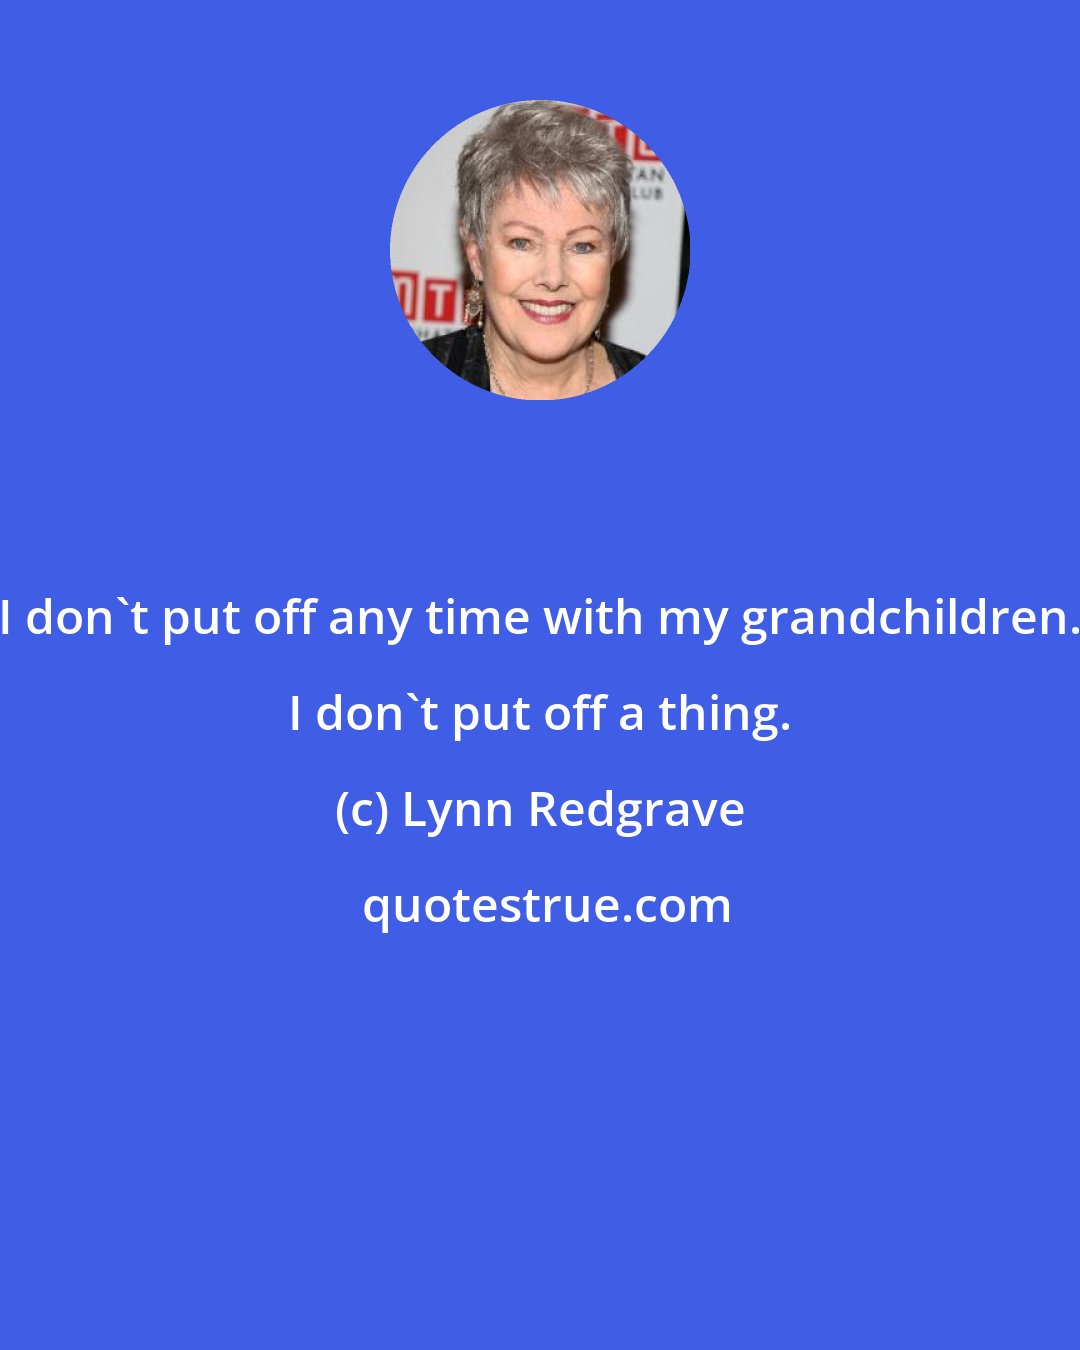 Lynn Redgrave: I don't put off any time with my grandchildren. I don't put off a thing.